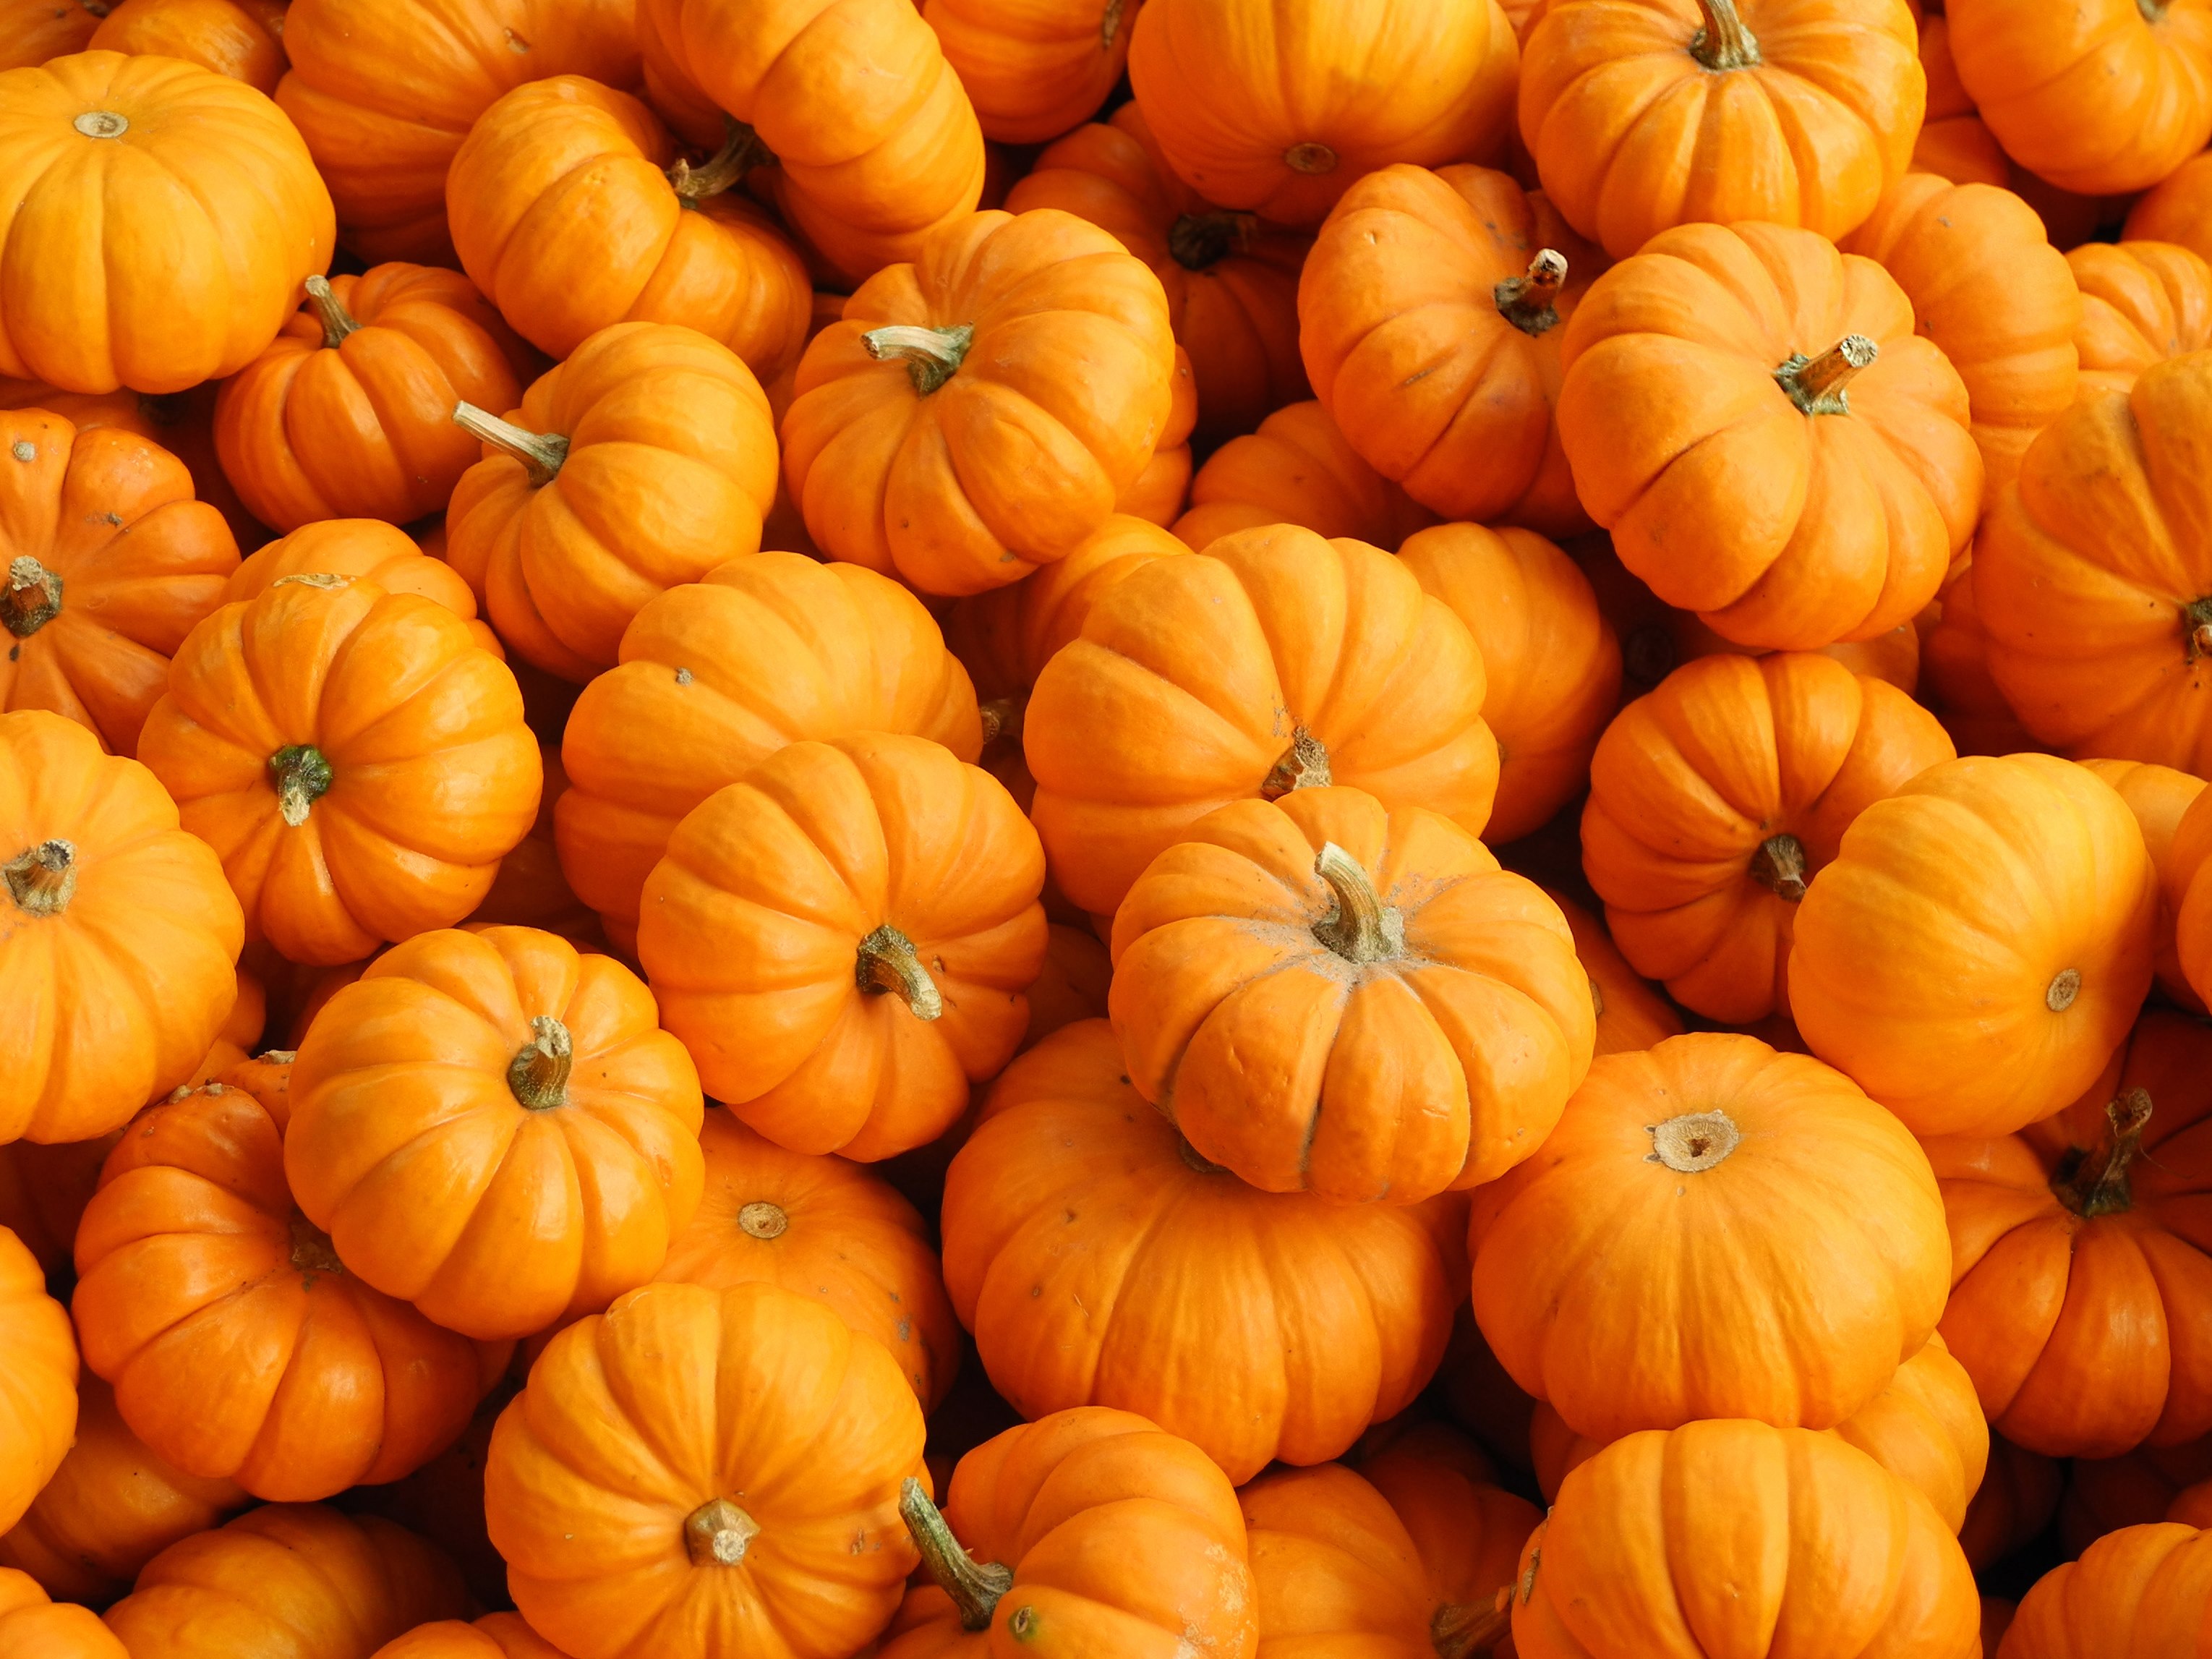 A picture of many pumpkins. Image by wirestock on Freepik.